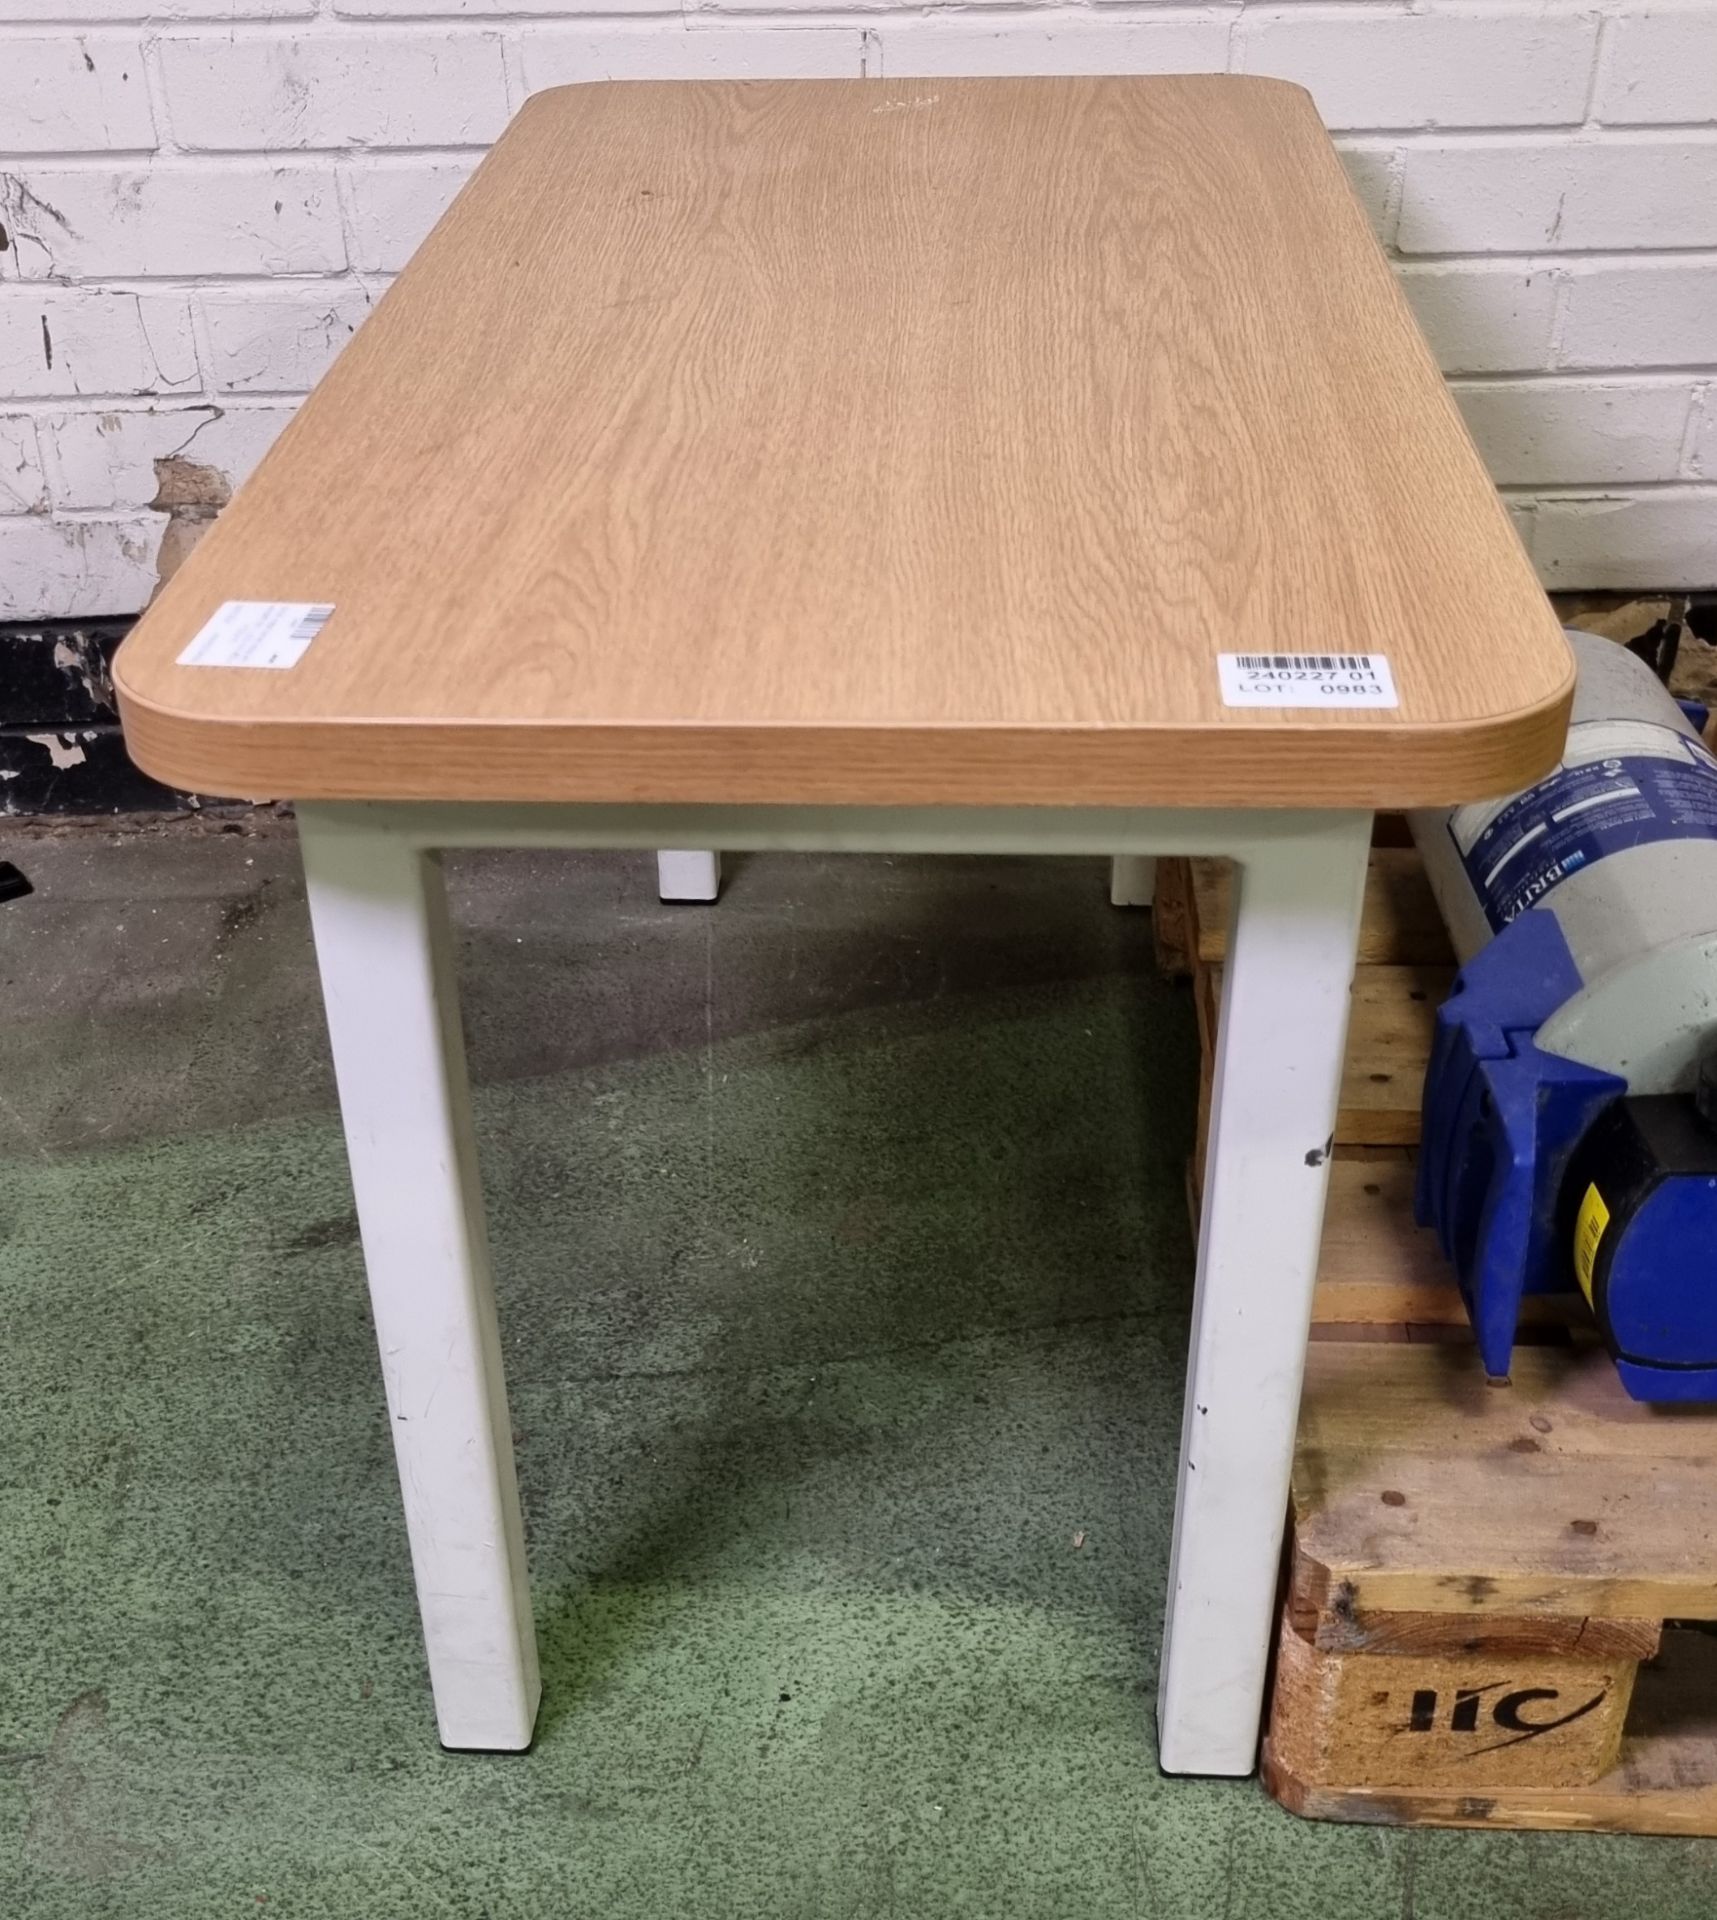 Small metal framed table with wooden top - L 920 x W 460 x H 520mm - Image 3 of 3